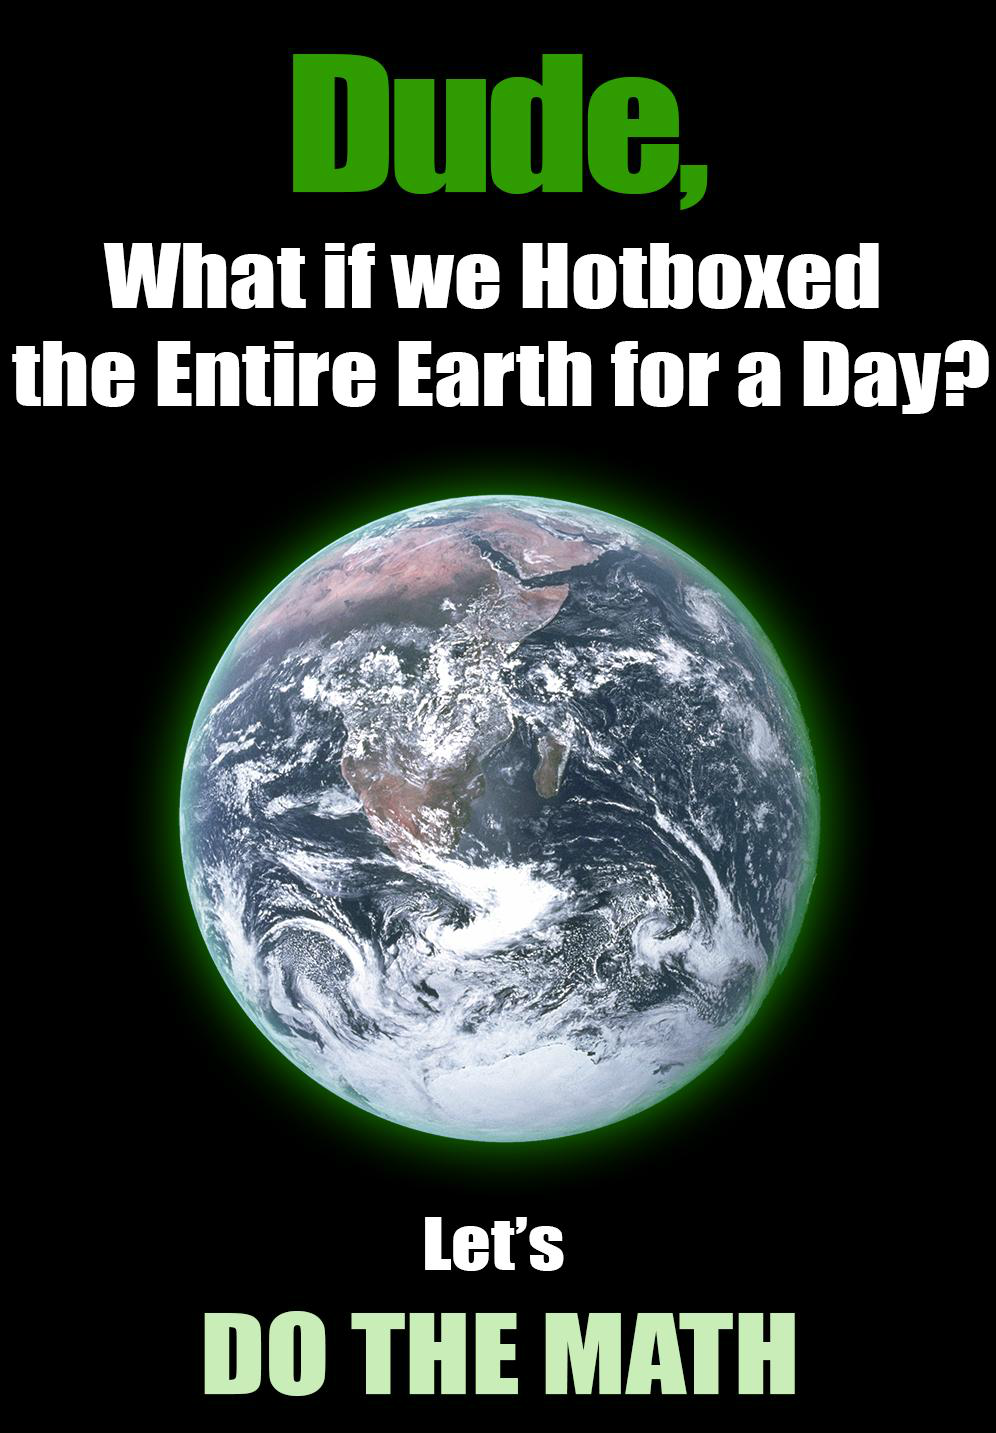 Hotbox the Earth reddit /r/trees